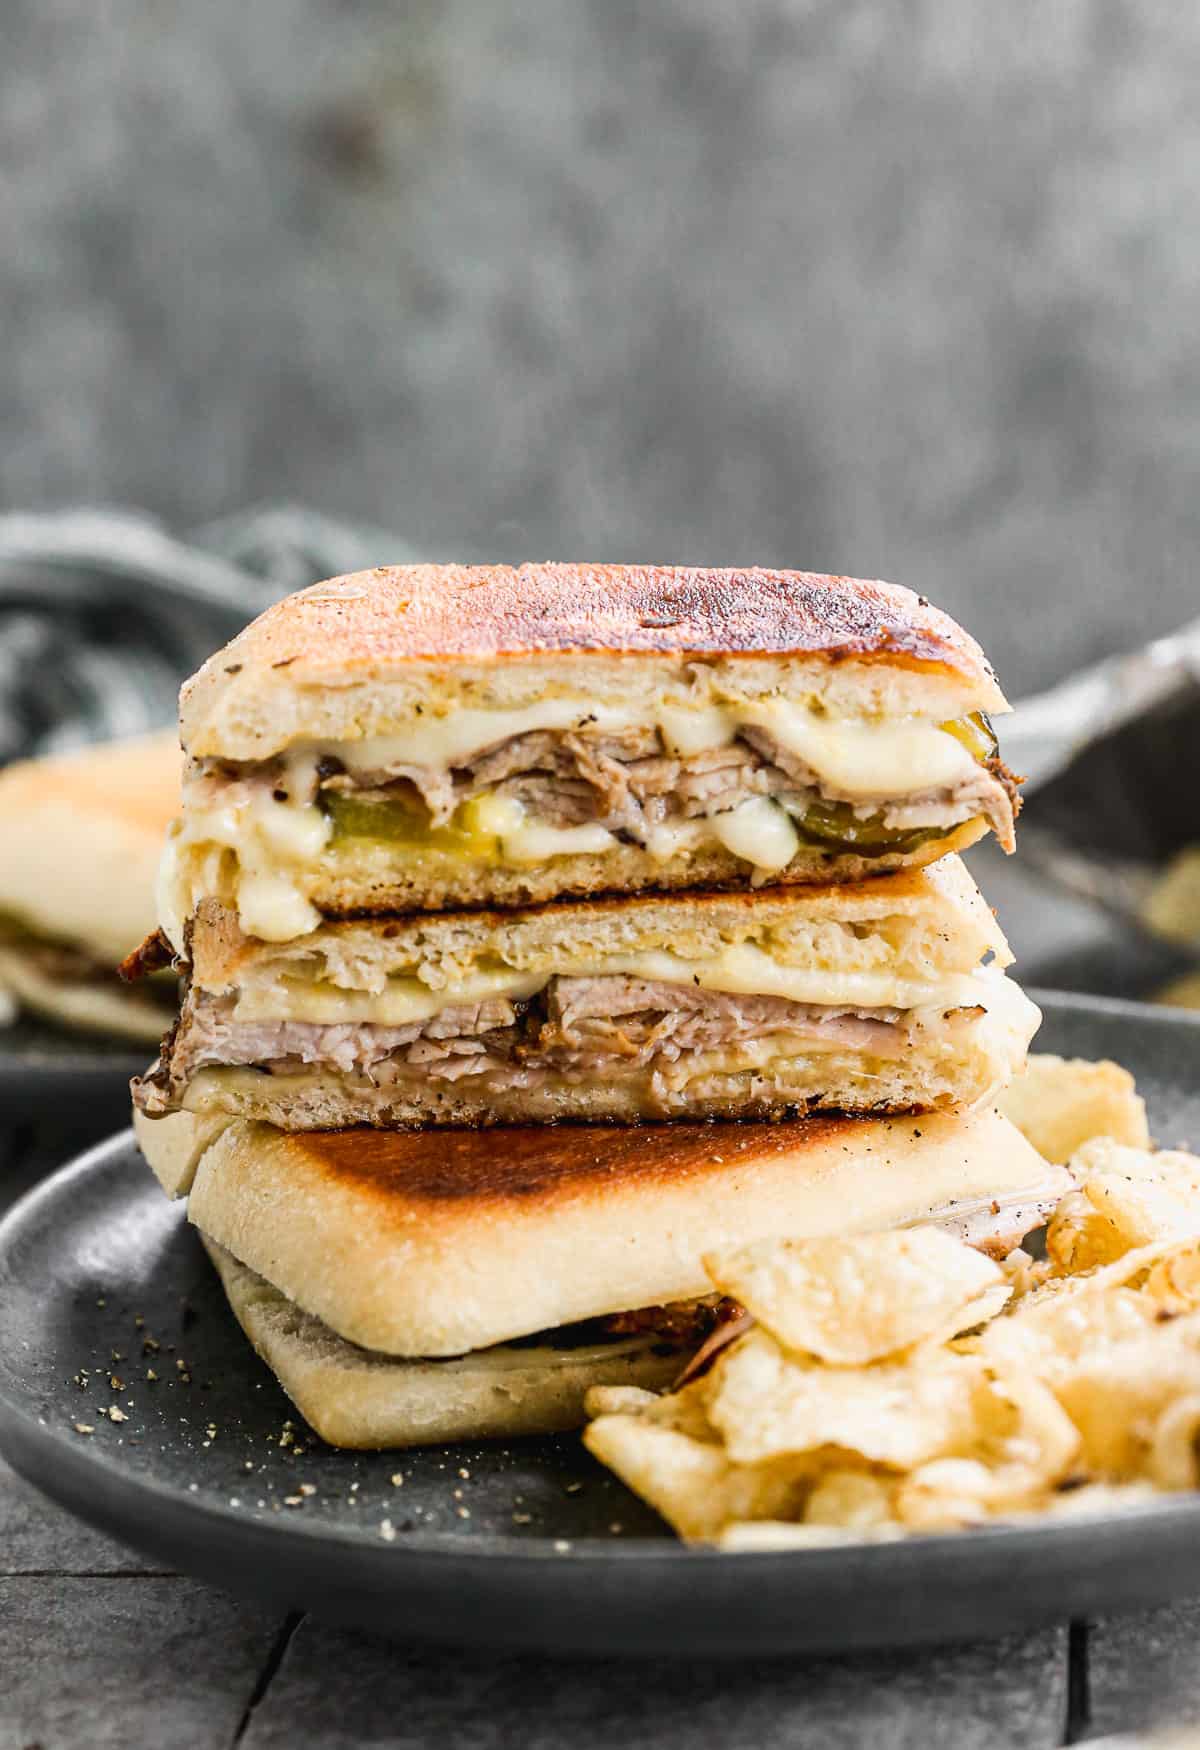 A traditional Cuban Sandwich sliced in half and placed on top of another sandwich, made with ciabatta rolls.